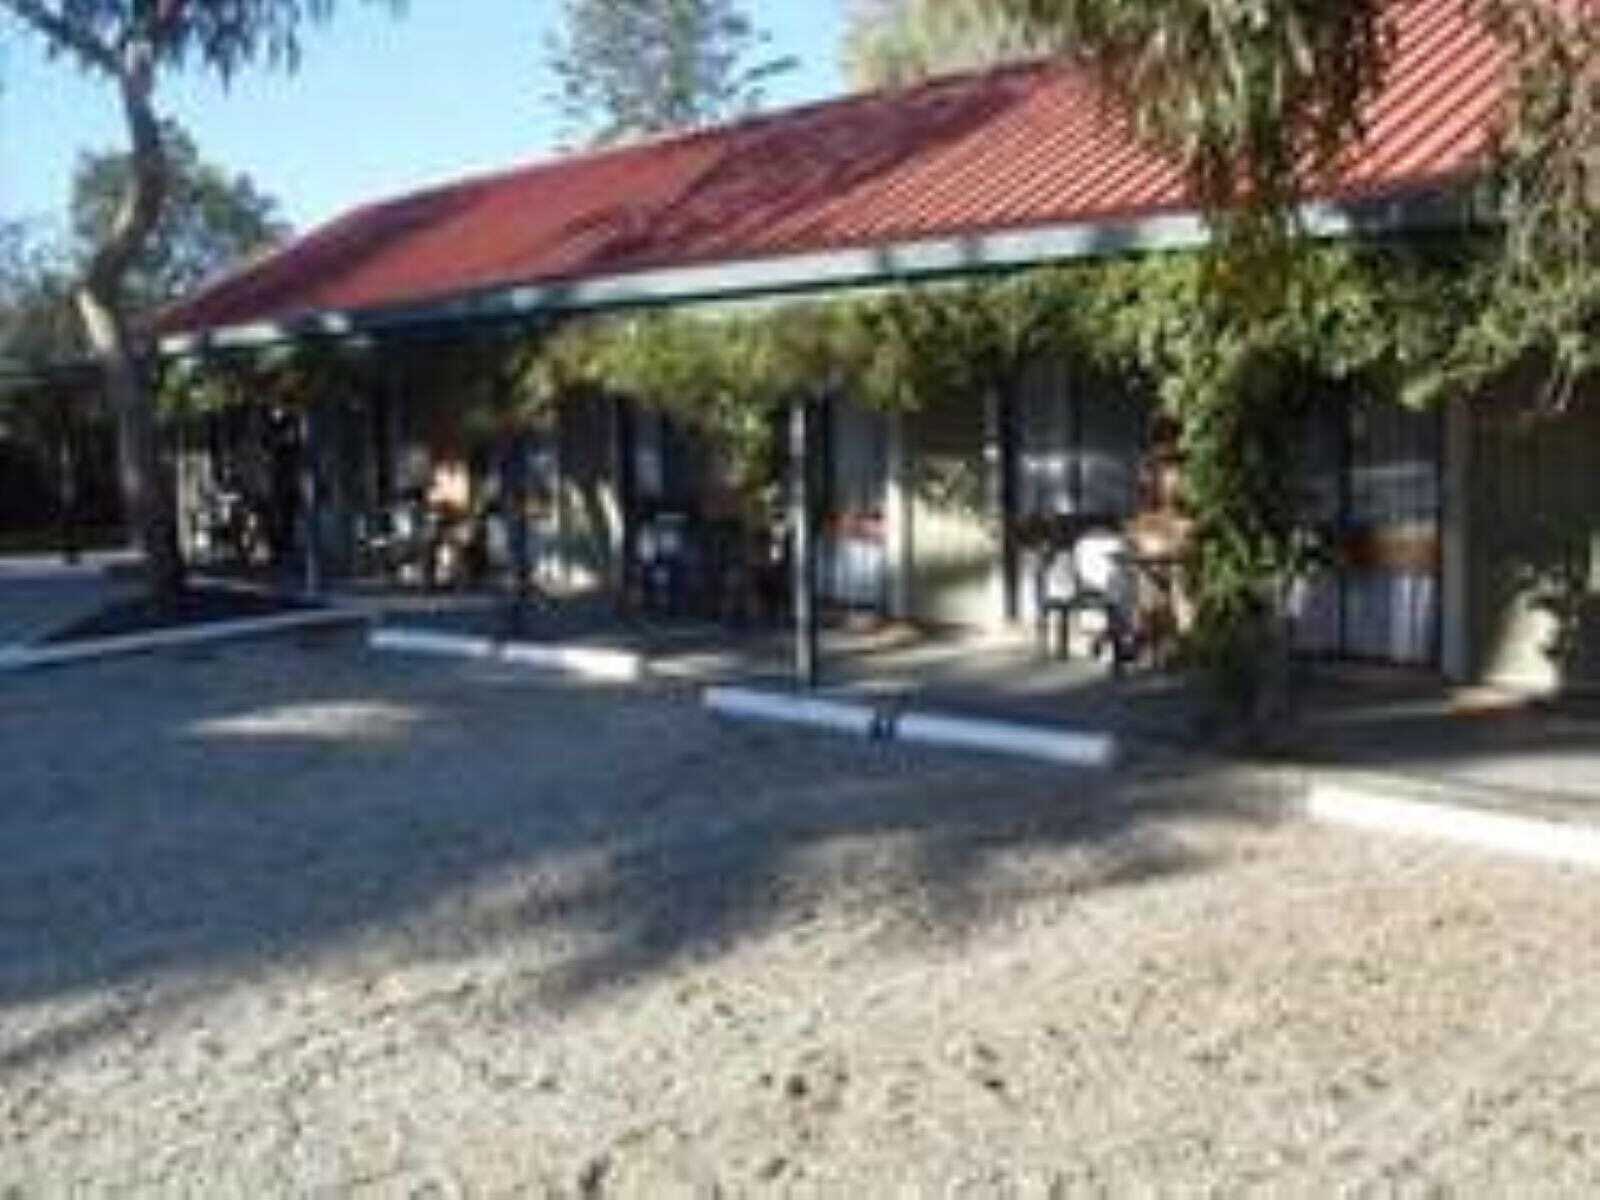 Outside of the Jolly Swagman, car park and vines out the front of the building